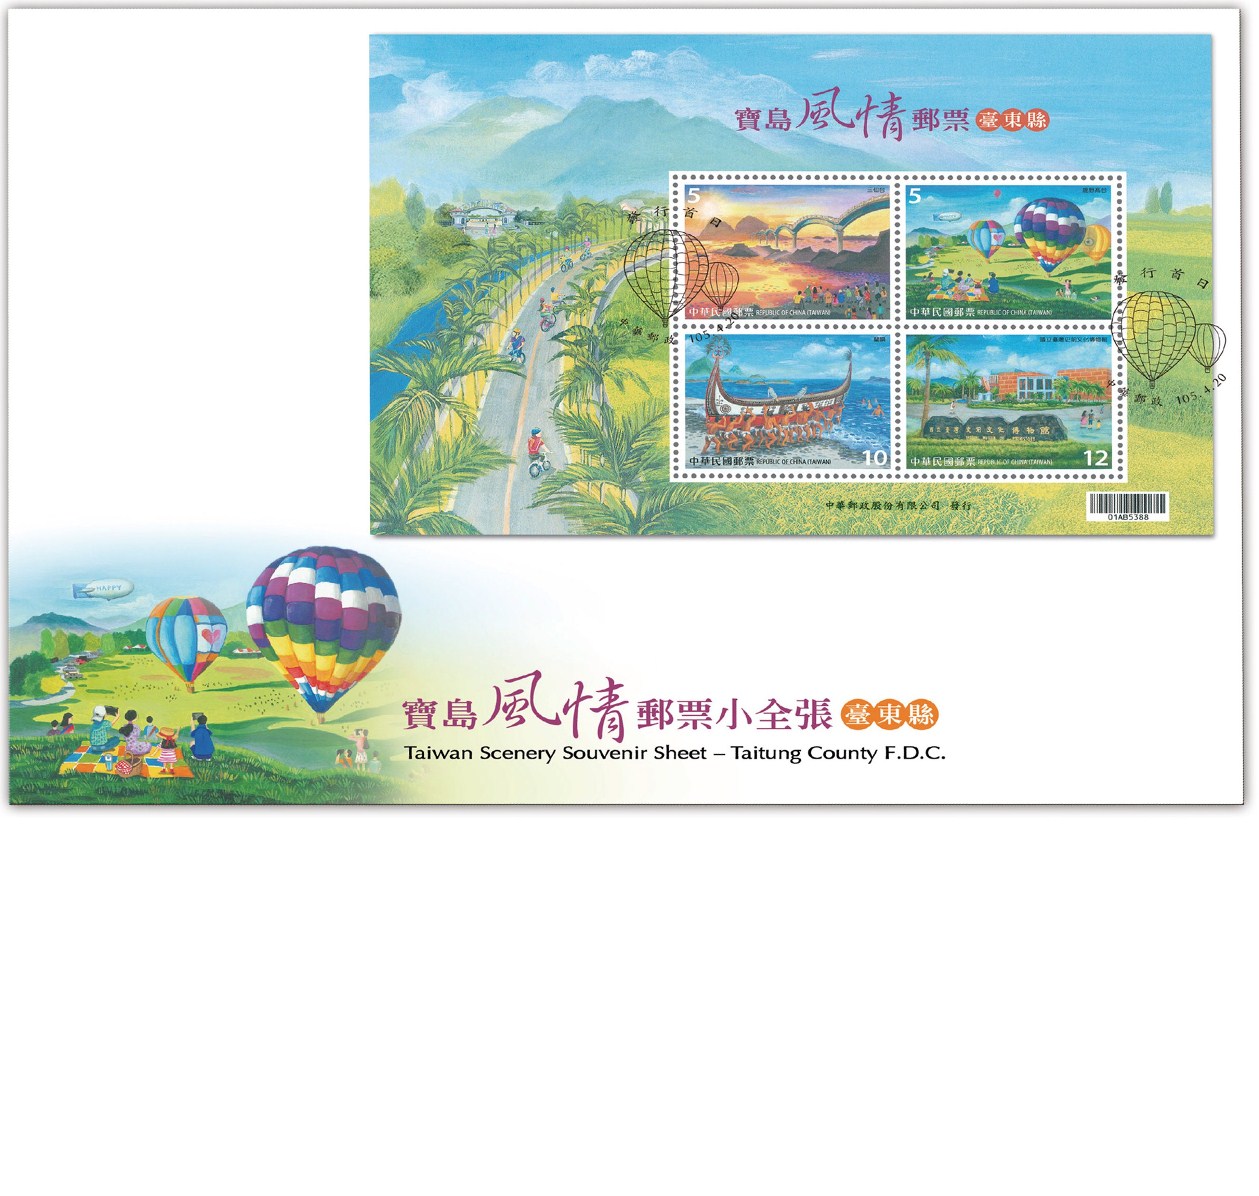 Taiwan Scenery Souvenir Sheet–Taitung County Pre-cancelled FDC in large size affixed with a souvenir sheet